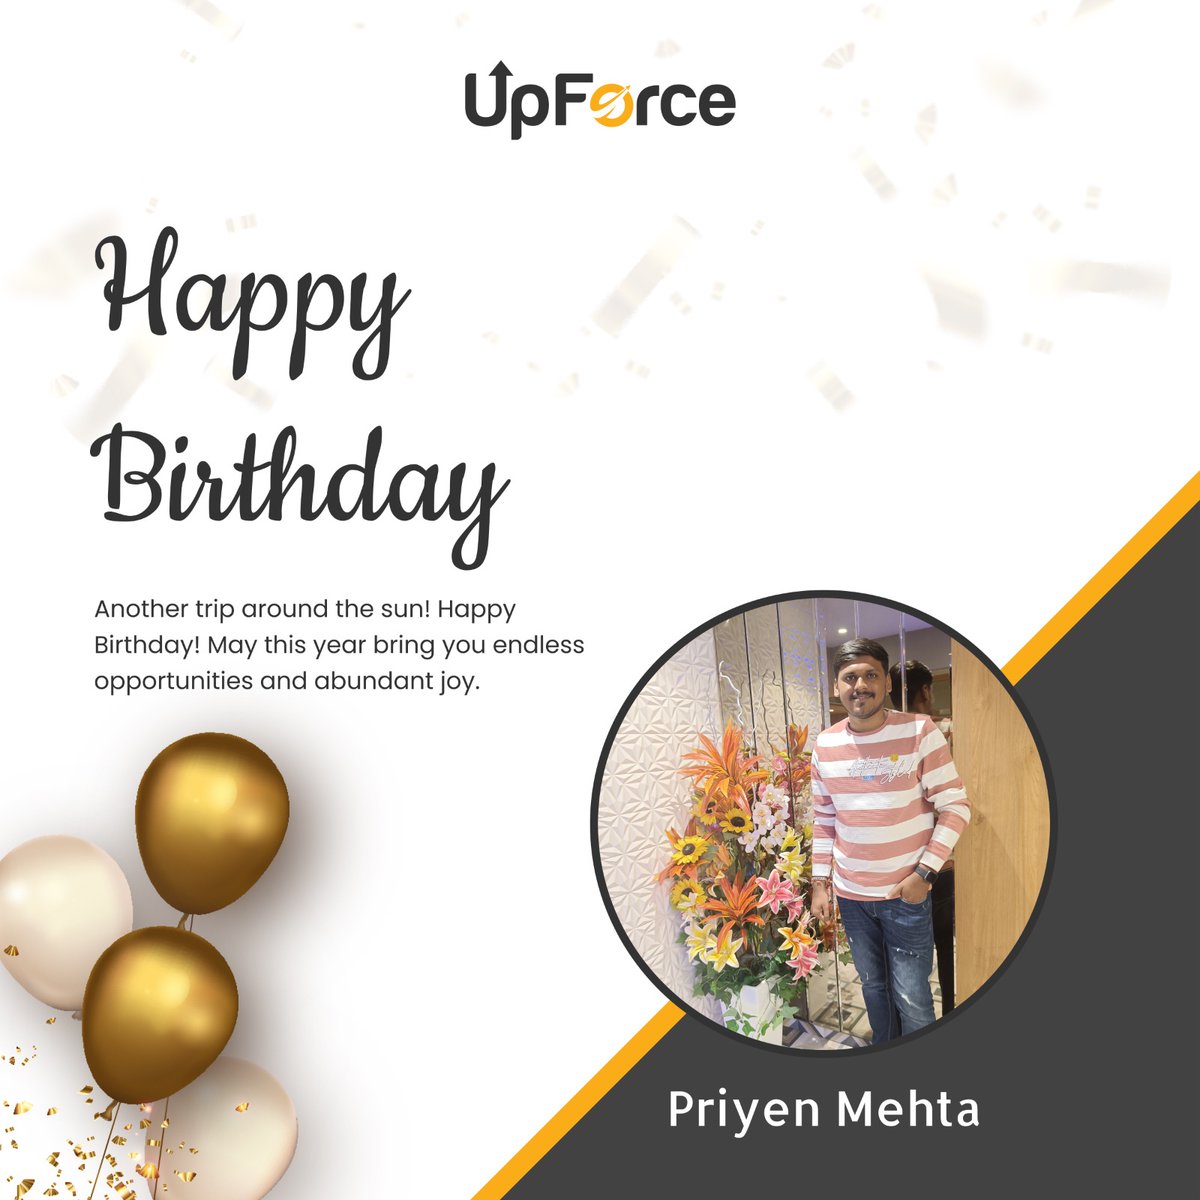 'Happy Birthday to our incredible team member at UpforceTech! 🎉 Your dedication and hard work are the real gifts to our company. Here's to another amazing year ahead filled with success and joy! 🎂🎈 #UpforceFamily #BirthdayCheers'